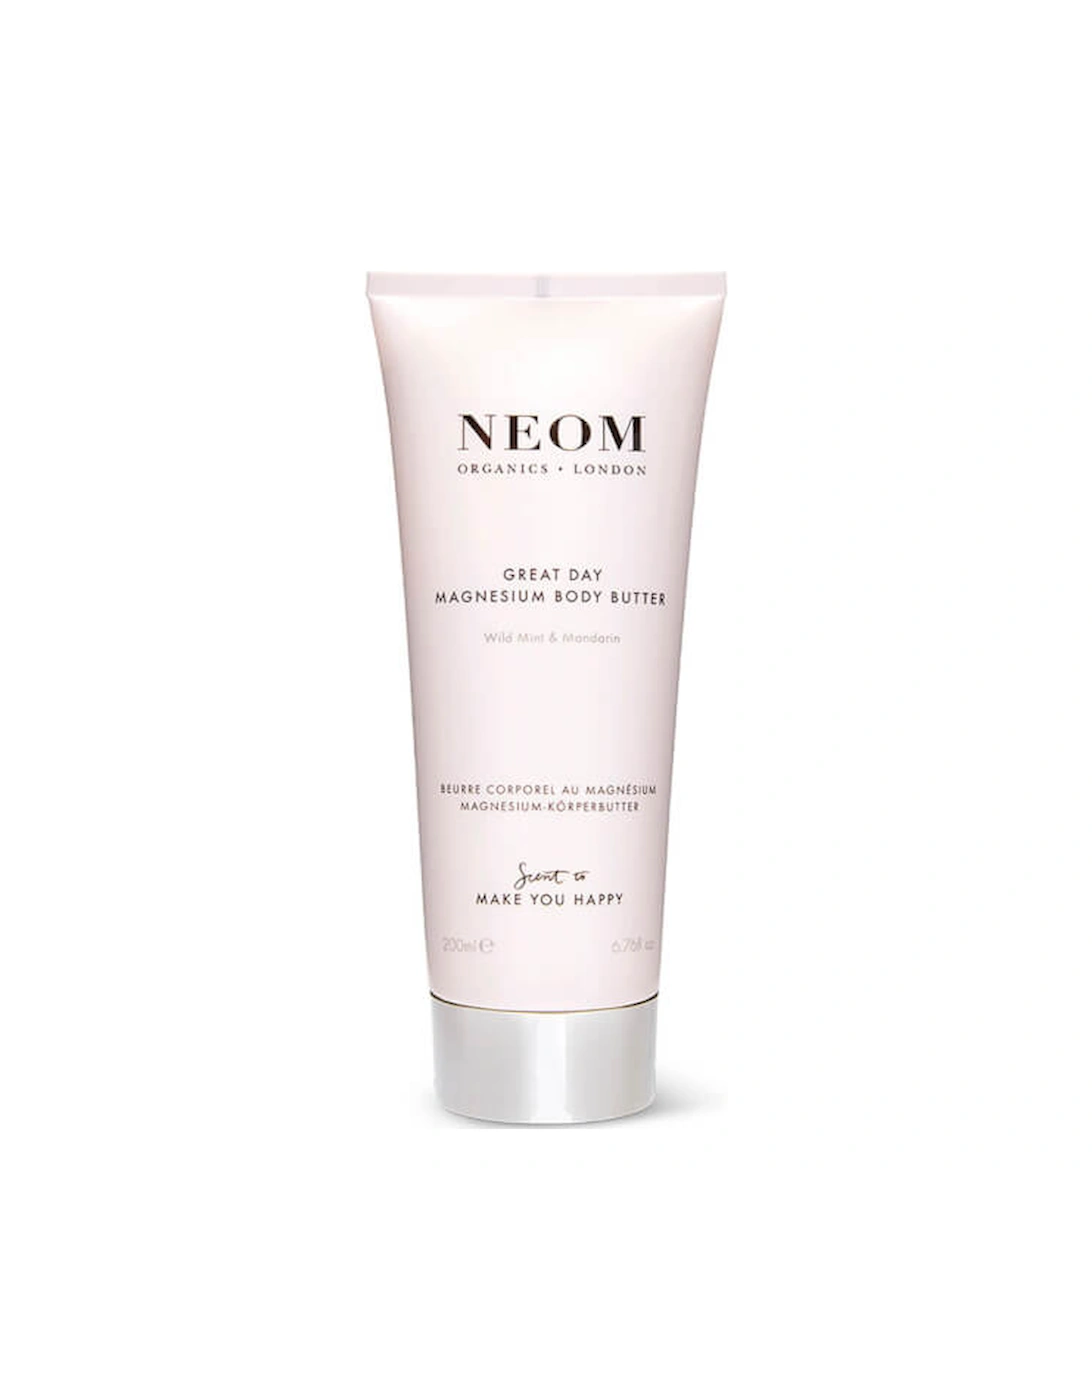 Great Day Magnesium Body Butter 200ml - NEOM, 2 of 1